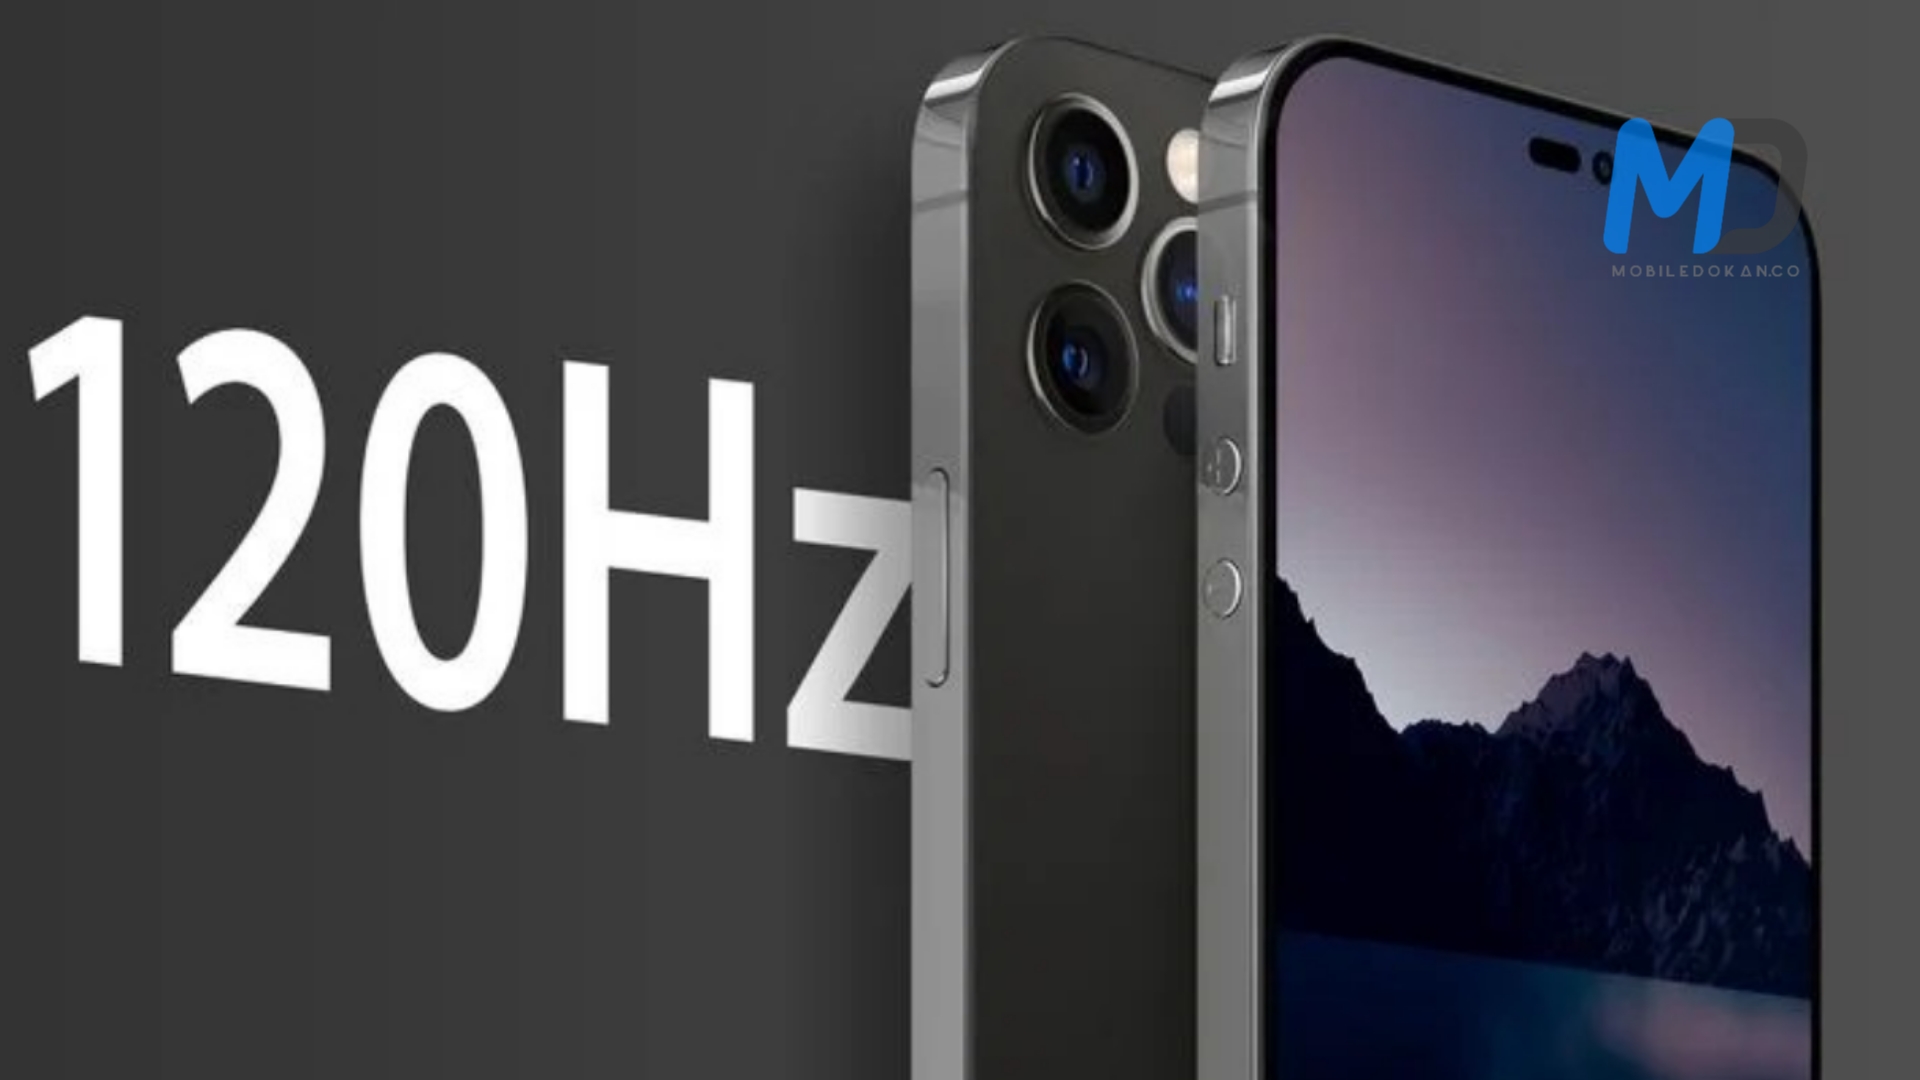 iPhone 14 models expected to have 120 Hz screens, 6GB of RAM